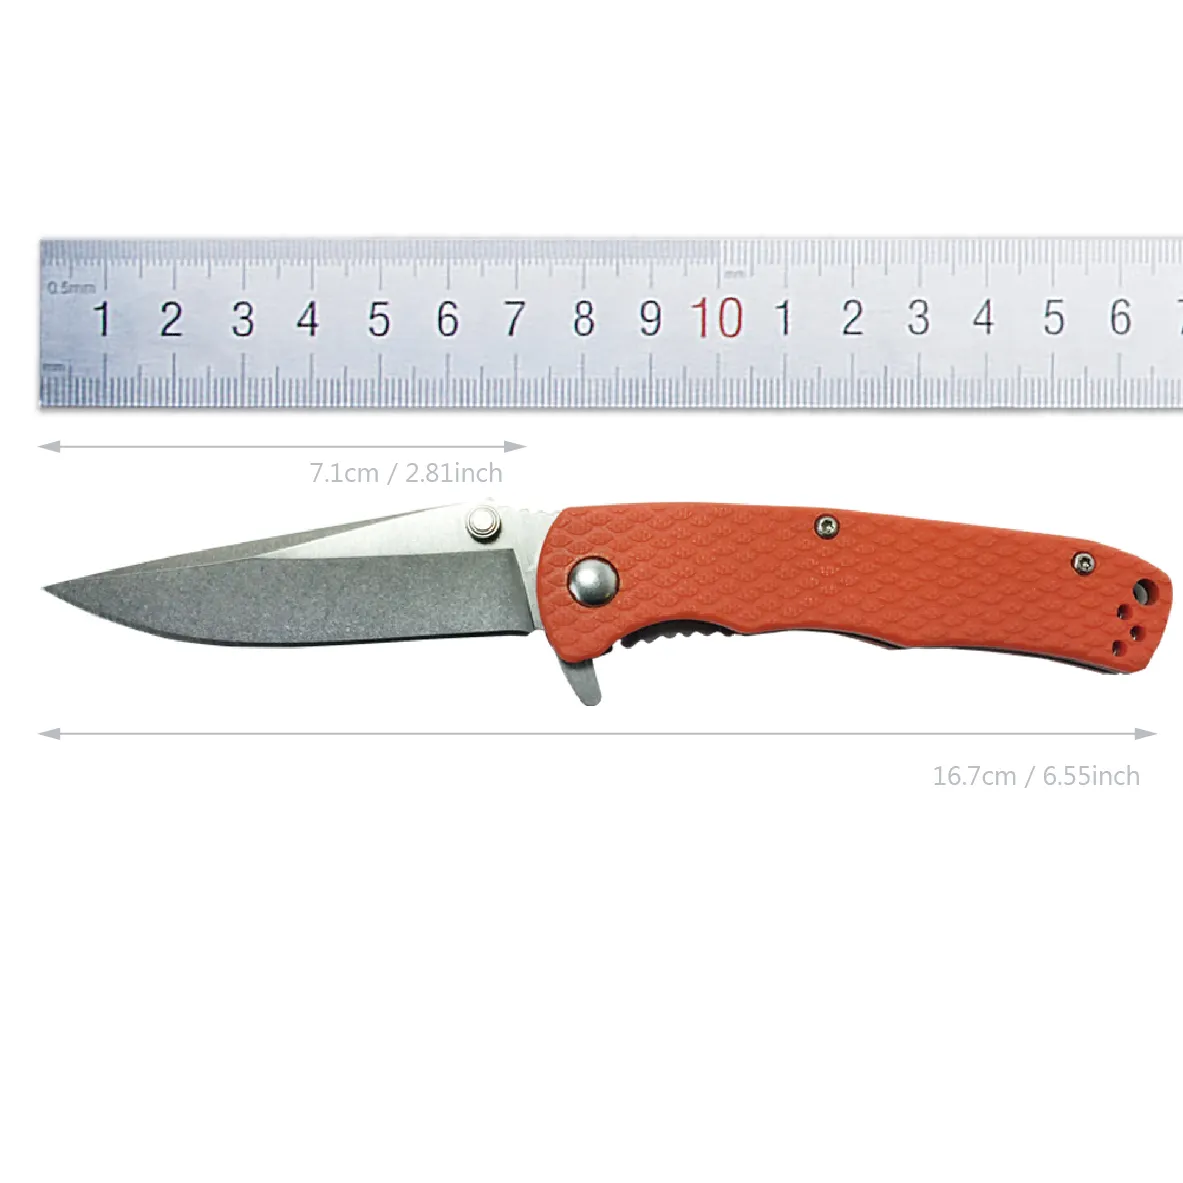 Taiwan Supplier Professional Outdoor Camping Liner Folding Aus8 Knife Suitable For Outside